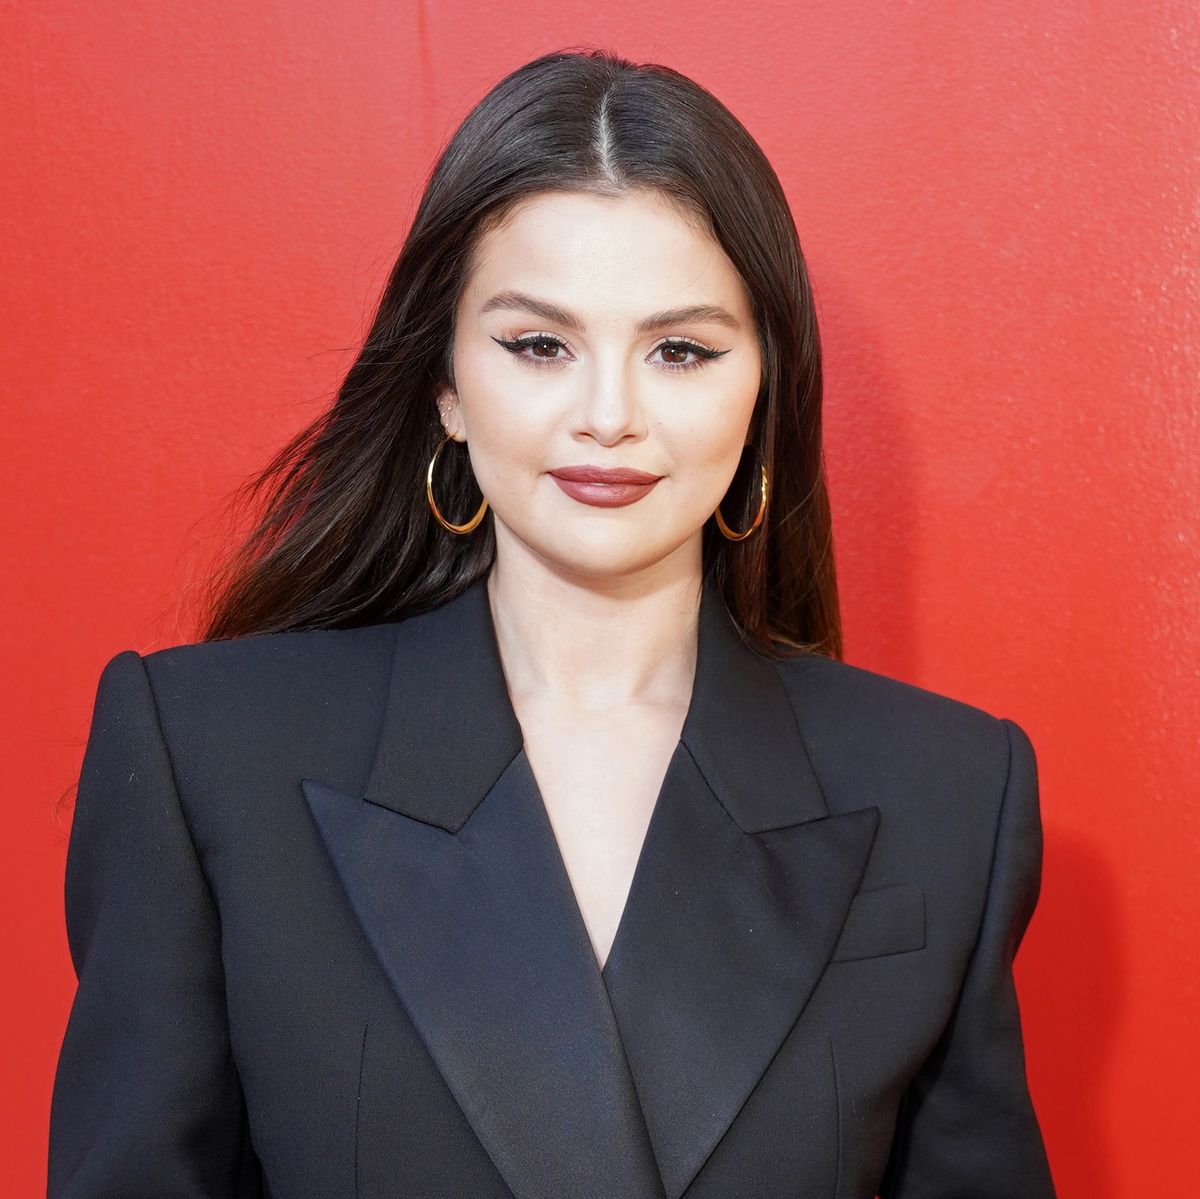 Selena Gomez Celebrates The Launch Of Rare Beauty's Kind Words Matte Lipstick And Liner Collection SANTA MONICA, CALIFORNIA - JUNE 29: Selena Gomez celebrates the launch of Rare Beauty's Kind Words Matte Lipstick and Liner Collection at Santa Monica Proper Hotel on June 29, 2022 in Santa Monica, California. (Photo by Presley Ann/Getty Images for Rare Beauty)